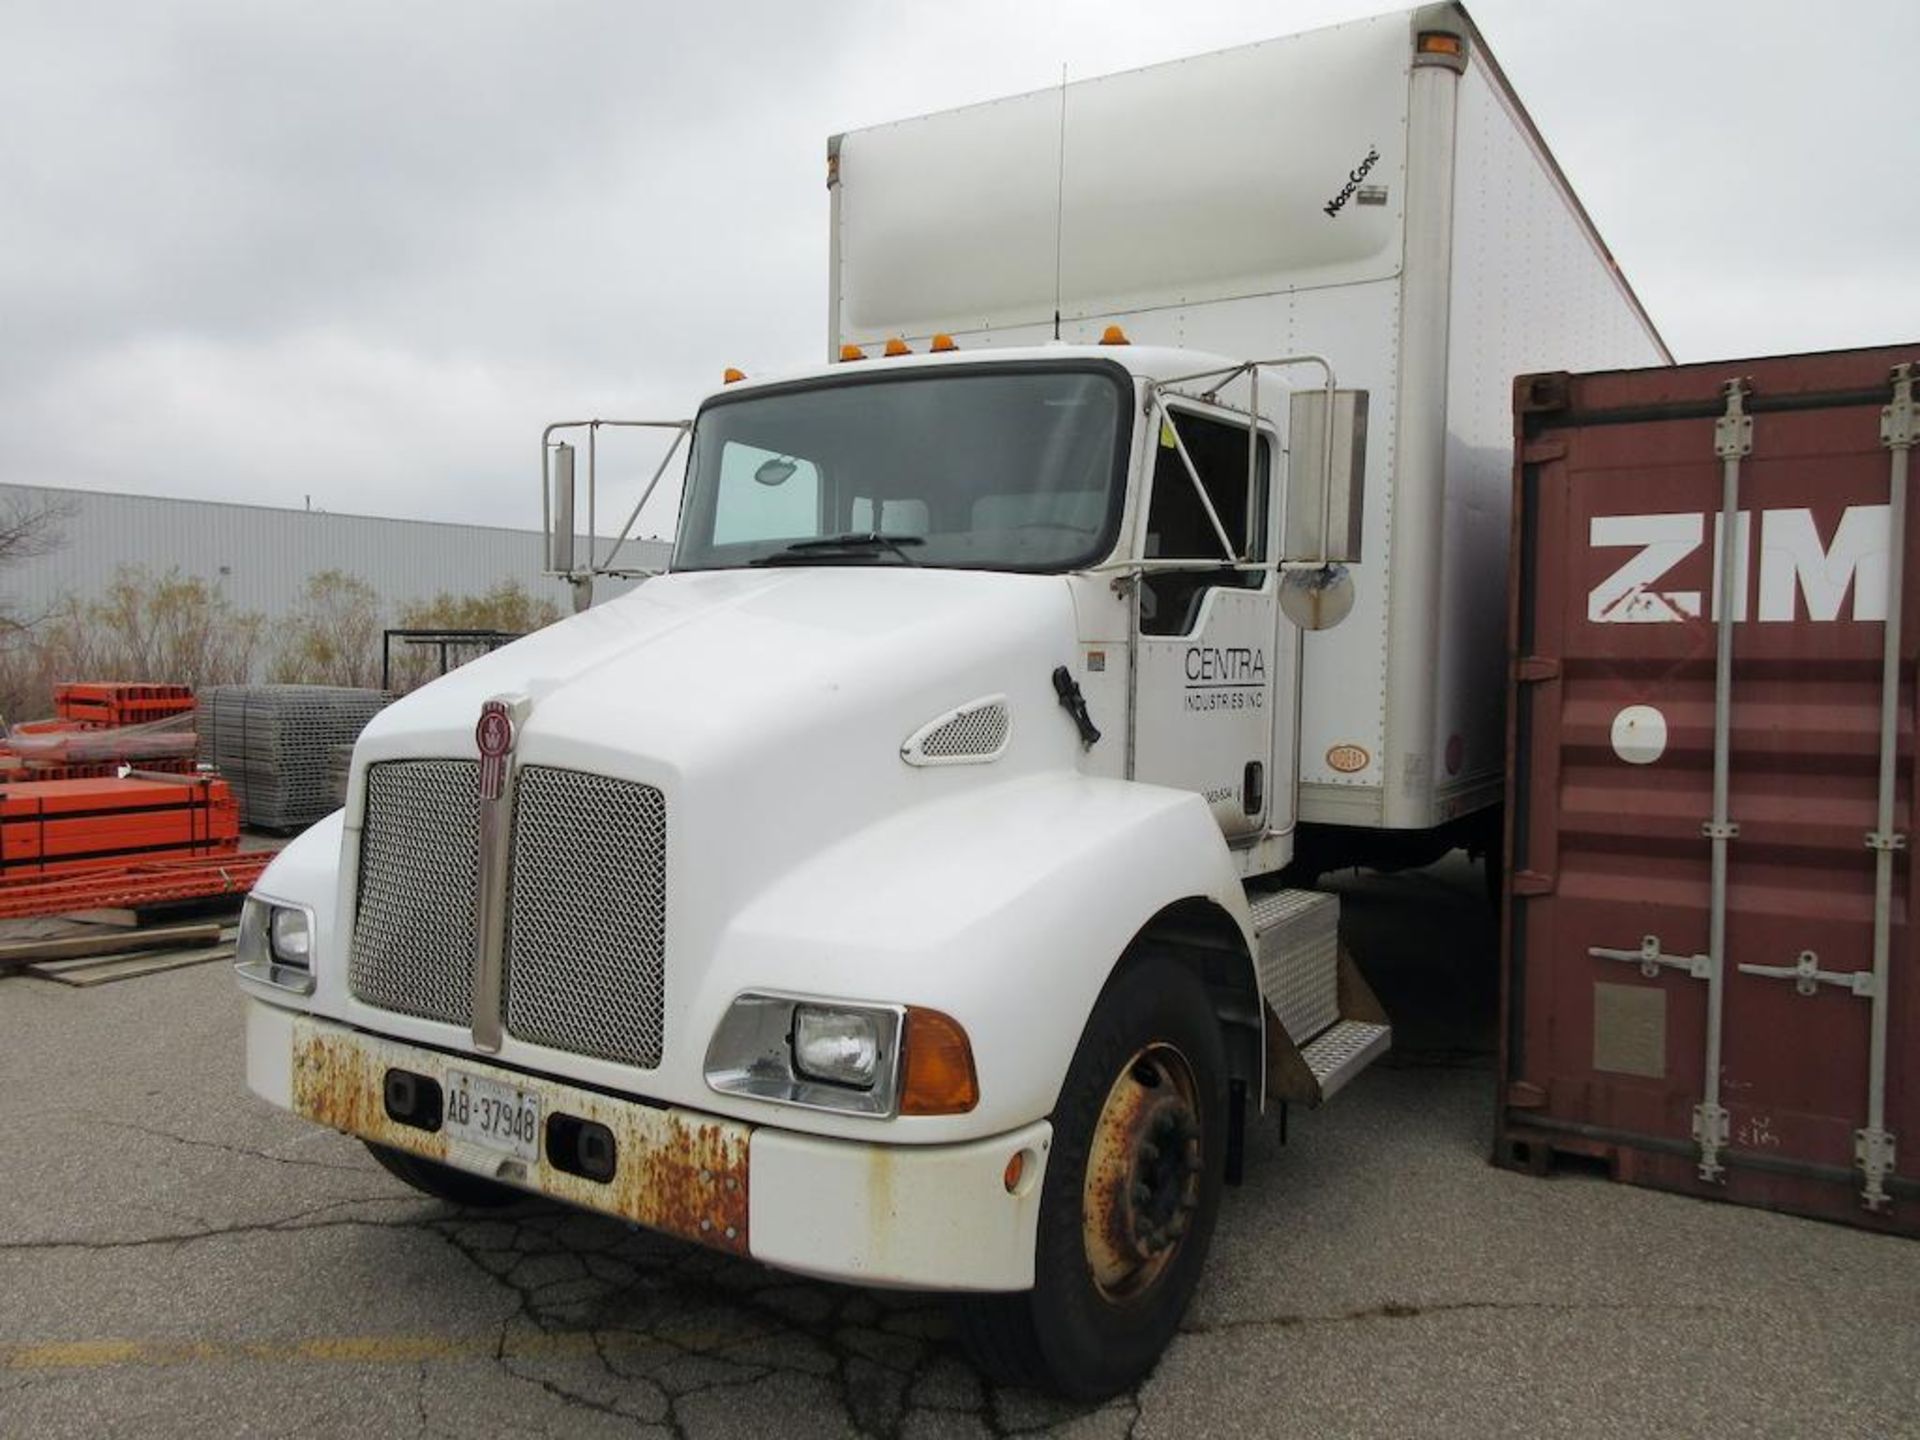 2006 Kenworth box truck model T300, 625,059 KM indicated, 10,866 hrs indicated, engine model ISB 260 - Image 2 of 15